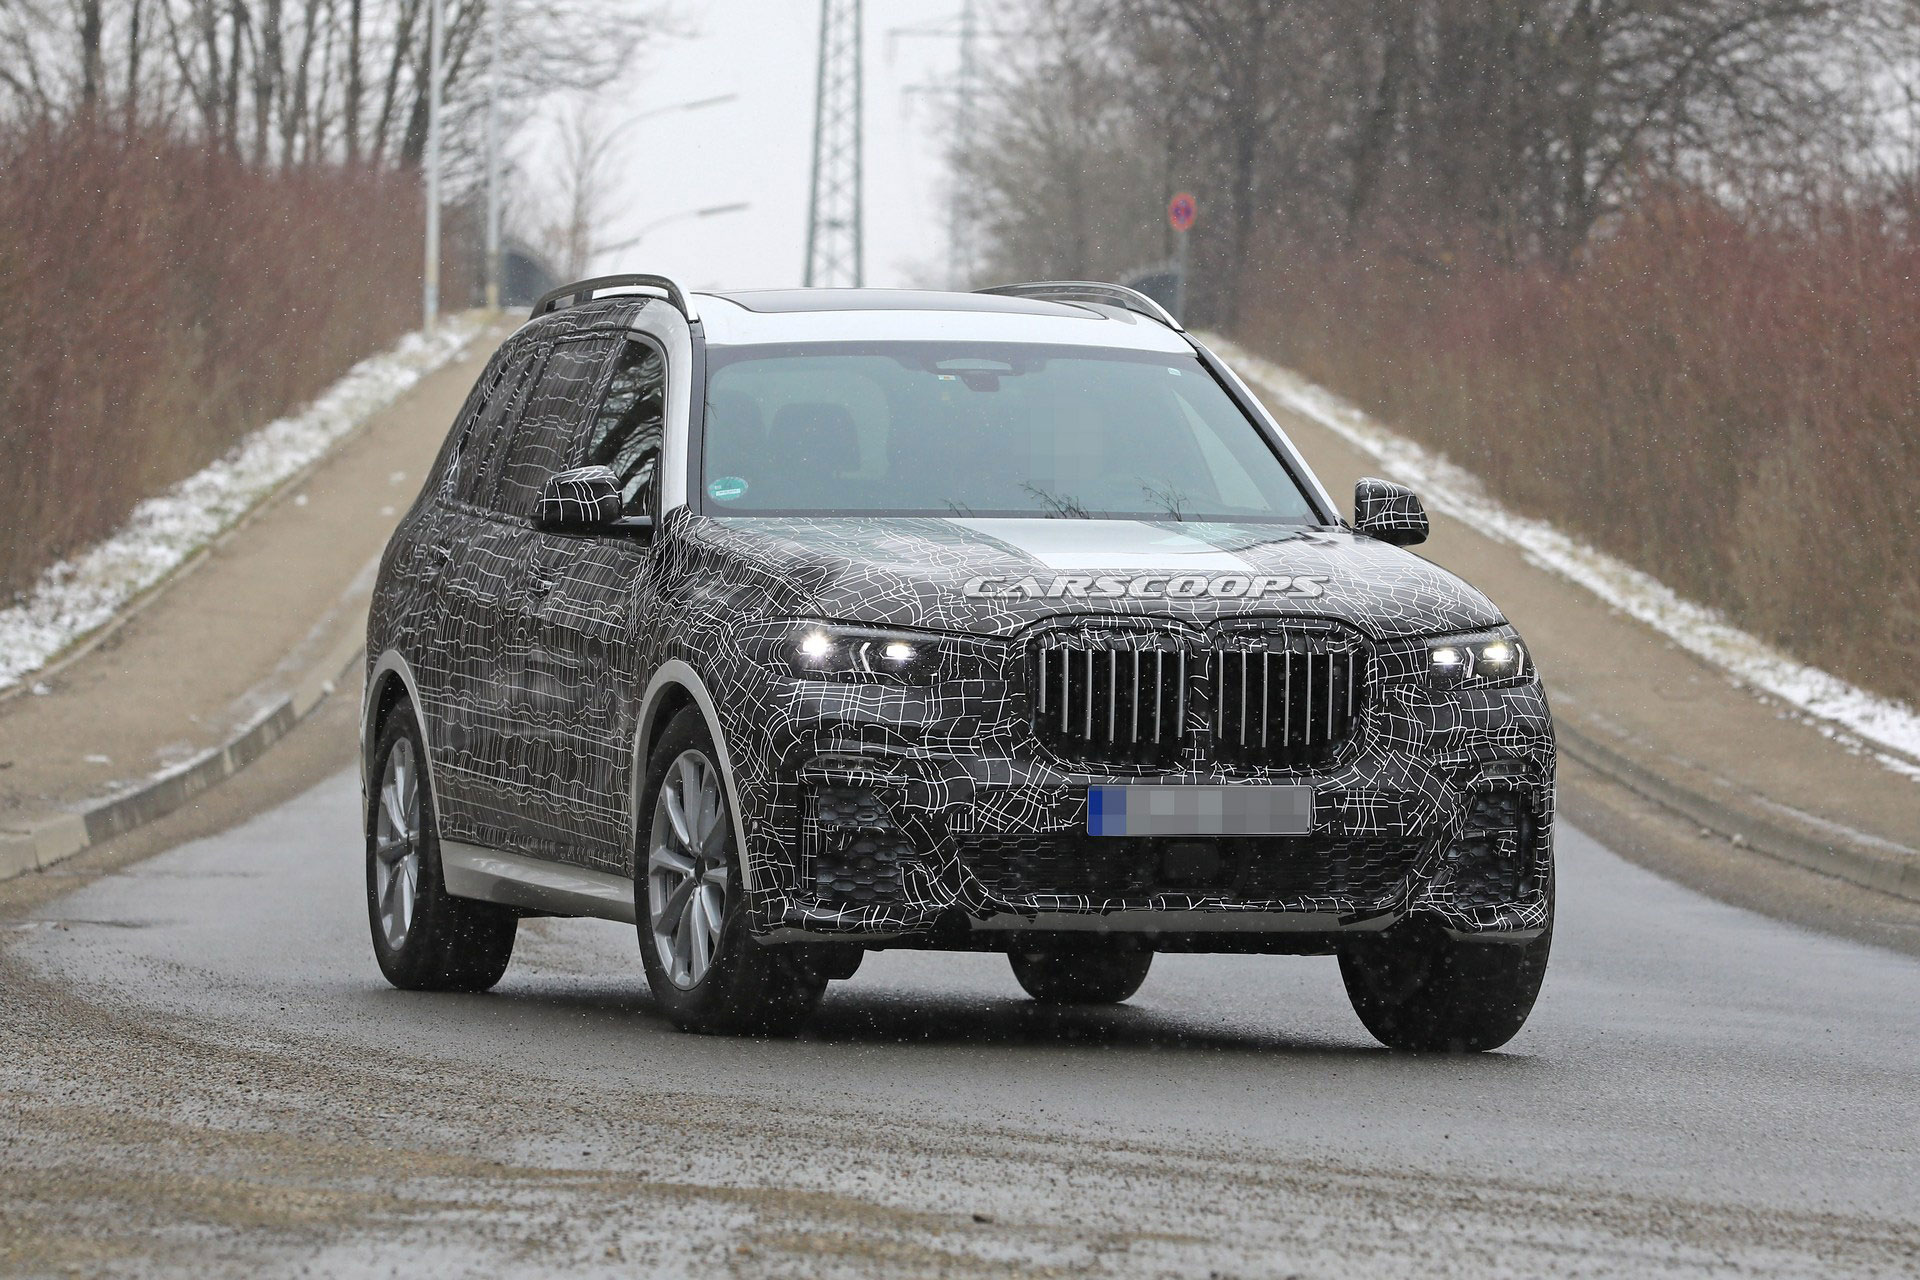 2019 BMW X7 Goes Back to Testing Session, Takes-Off the Heavy Camouflage